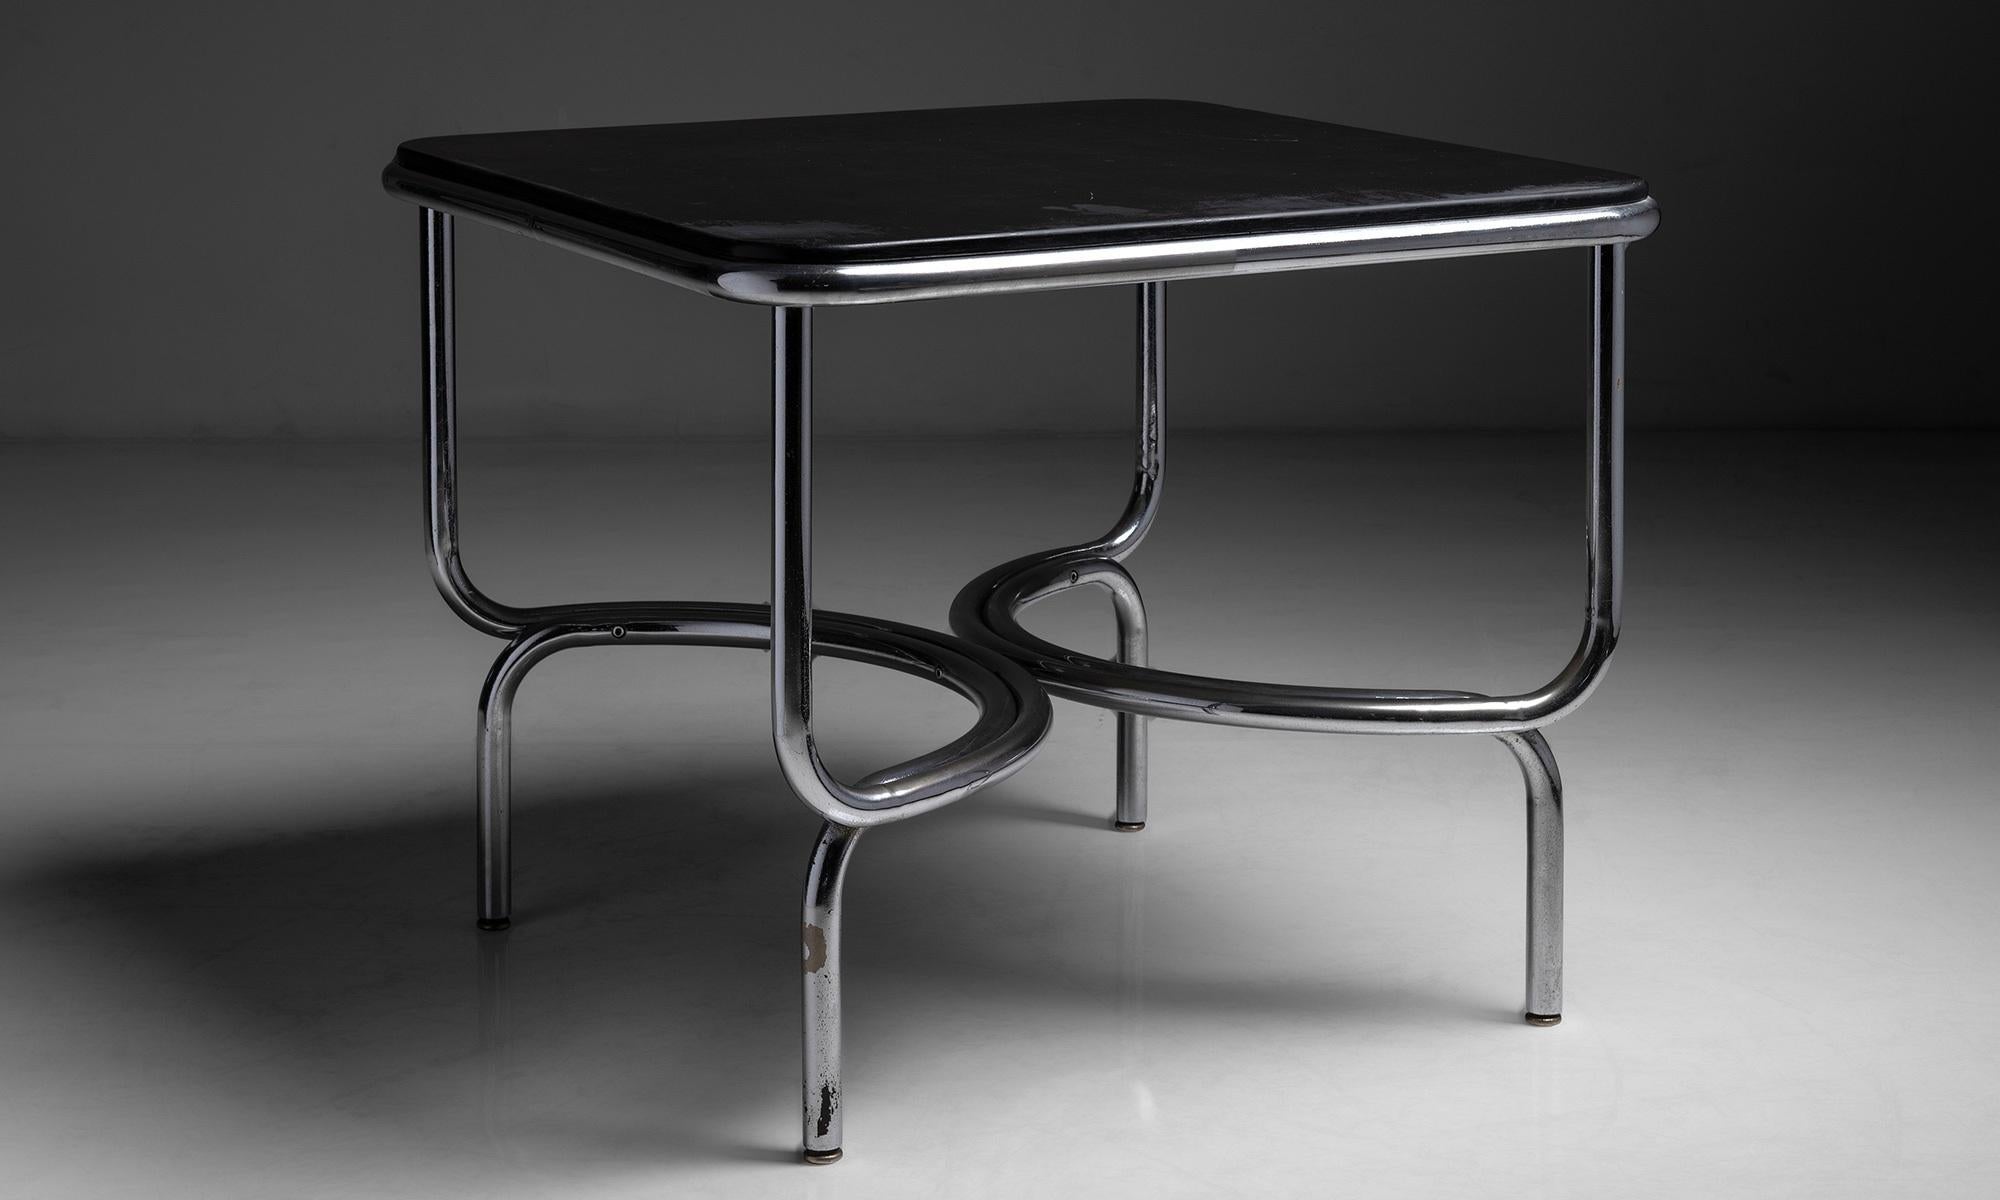 Chrome & Slate Table by Gae Aulenti

Italy circa 1965

From the ‘Locus Solus’ series, with chromed bent steel frame and slate tabletop.

33”L x 33”d x 27.5”h